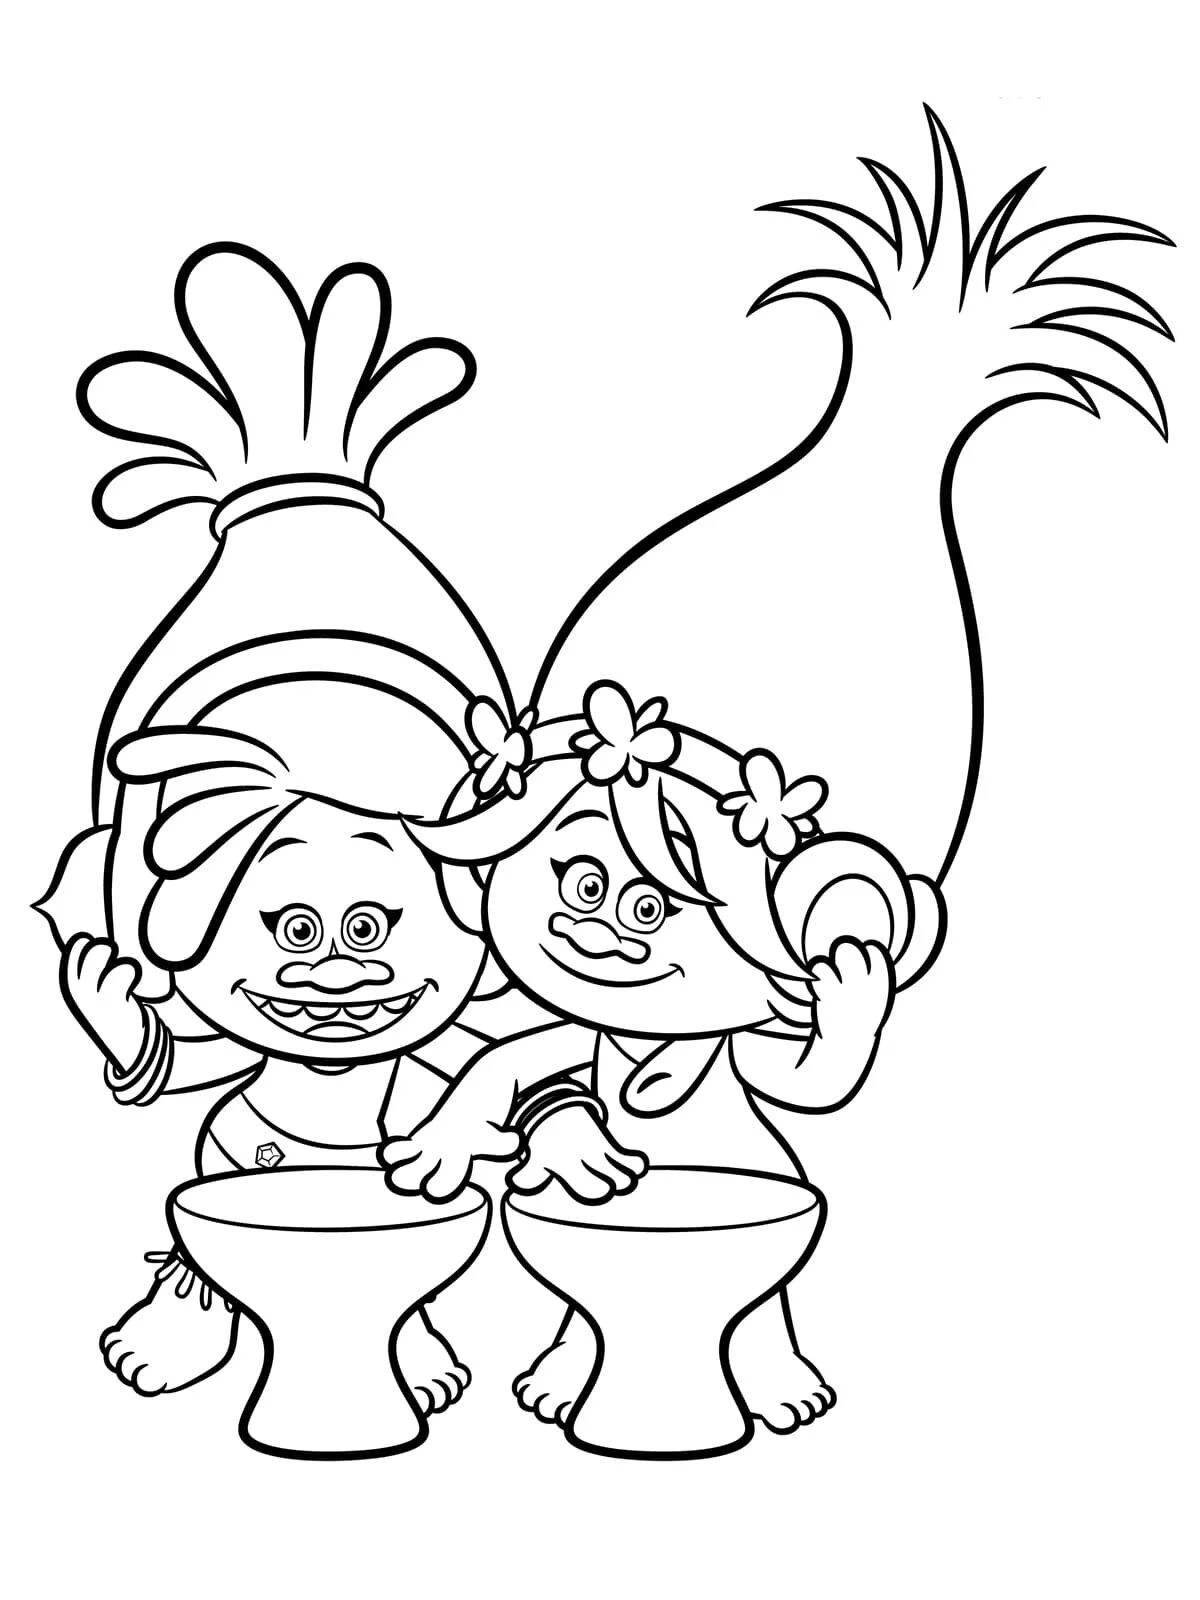 Playful coloring of children's trolls